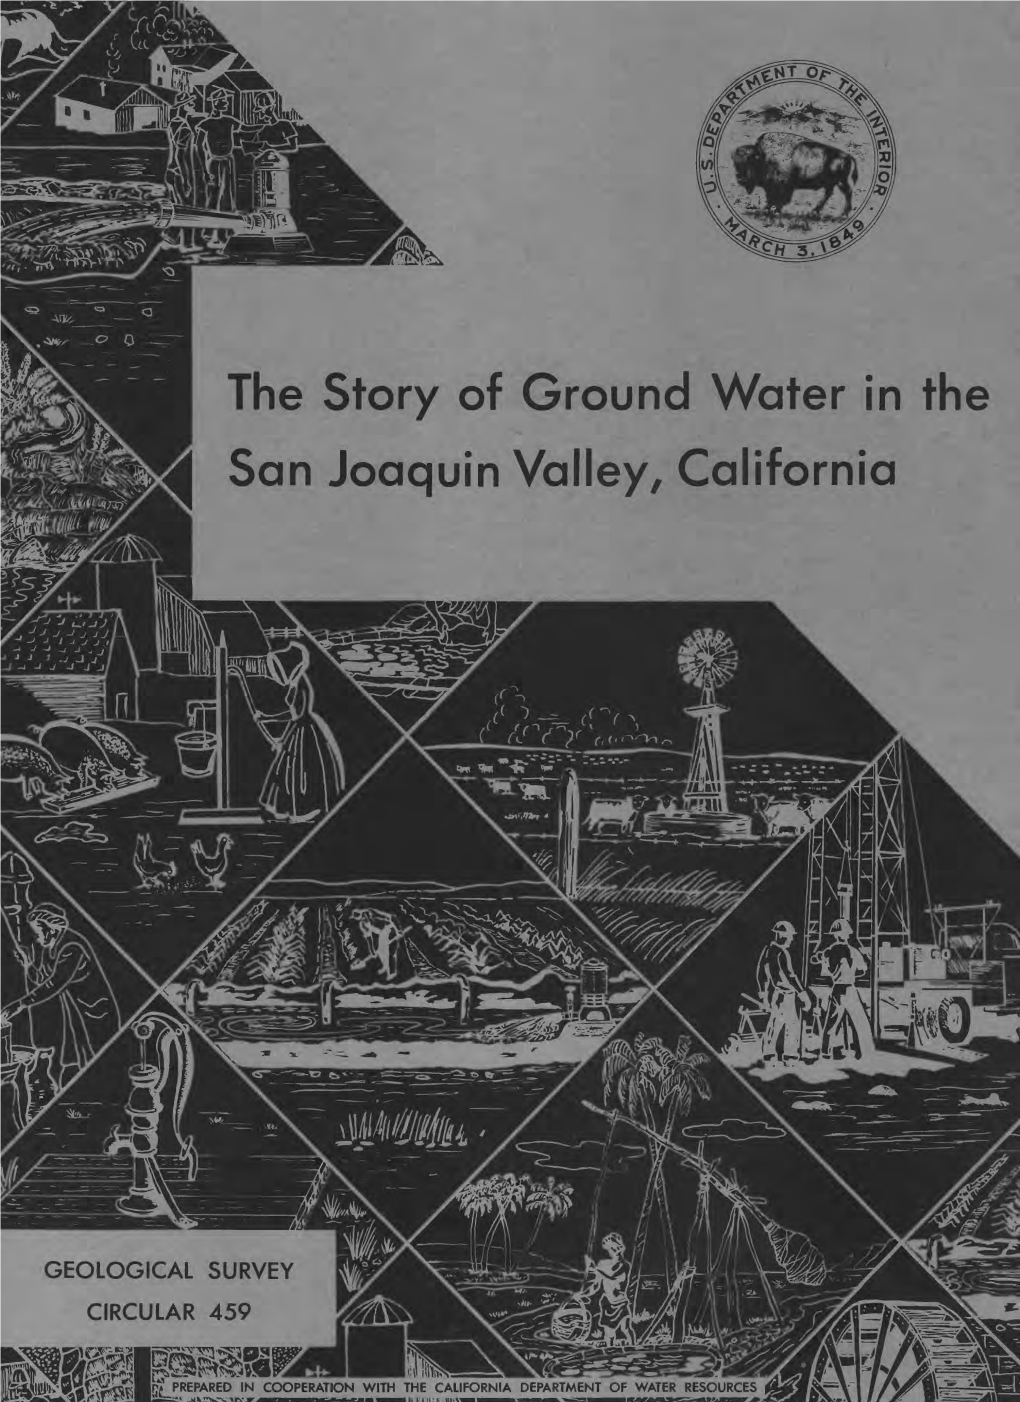 The Story of Ground Water in the San Joaquin Valley, California